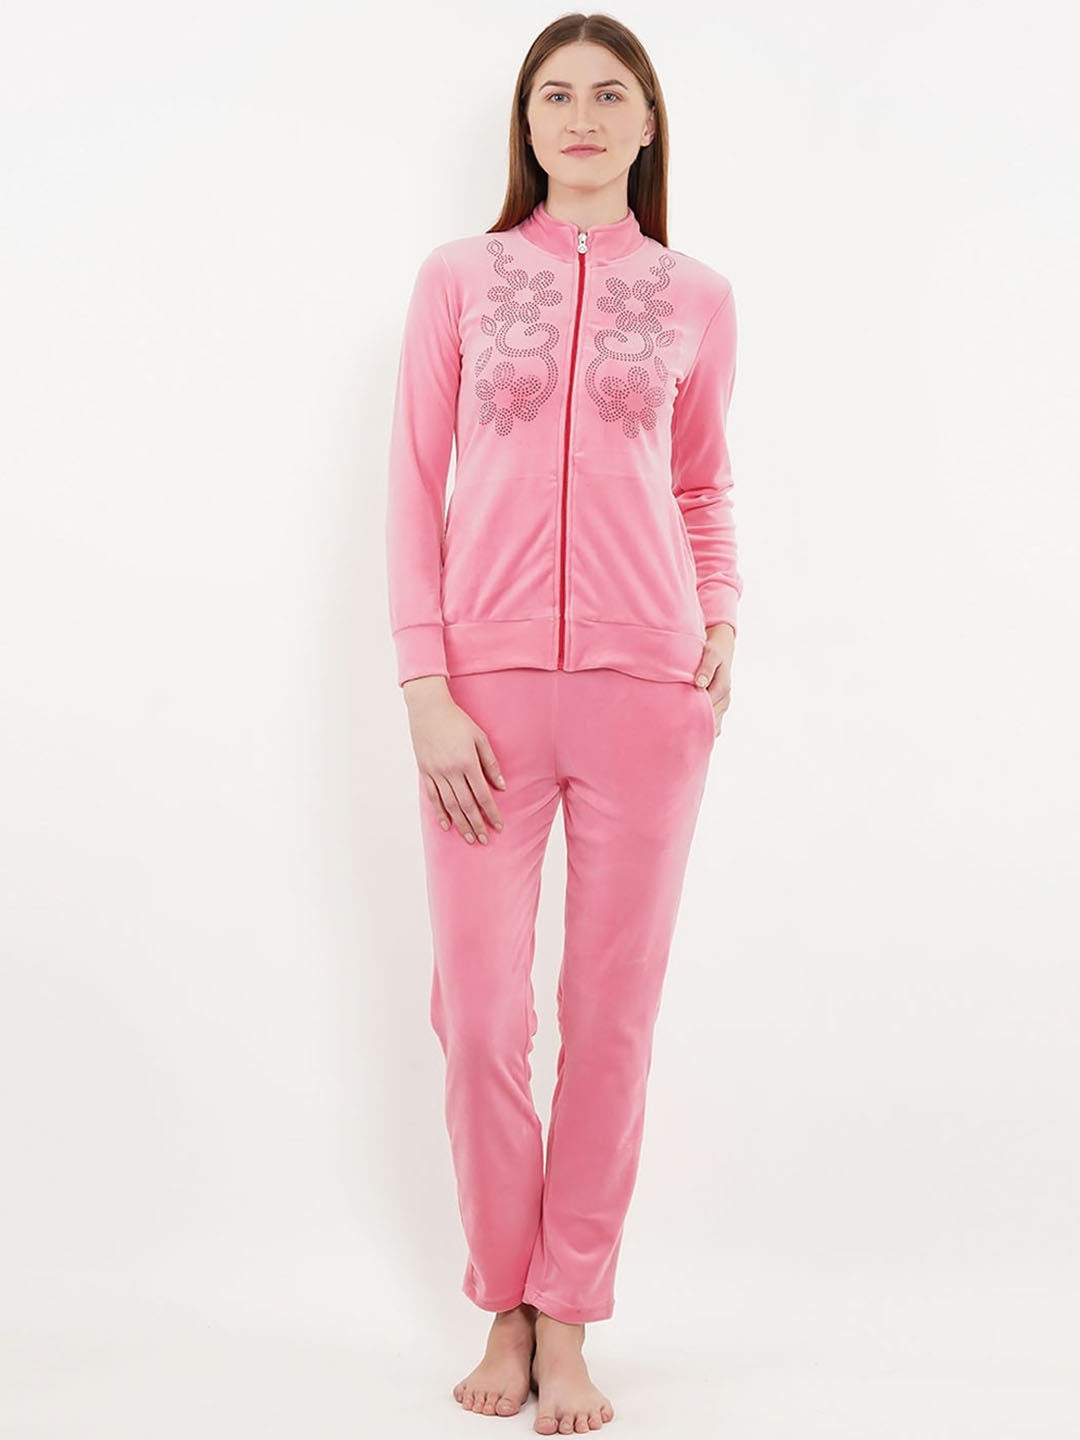 Hot Pink Velour Tracksuit